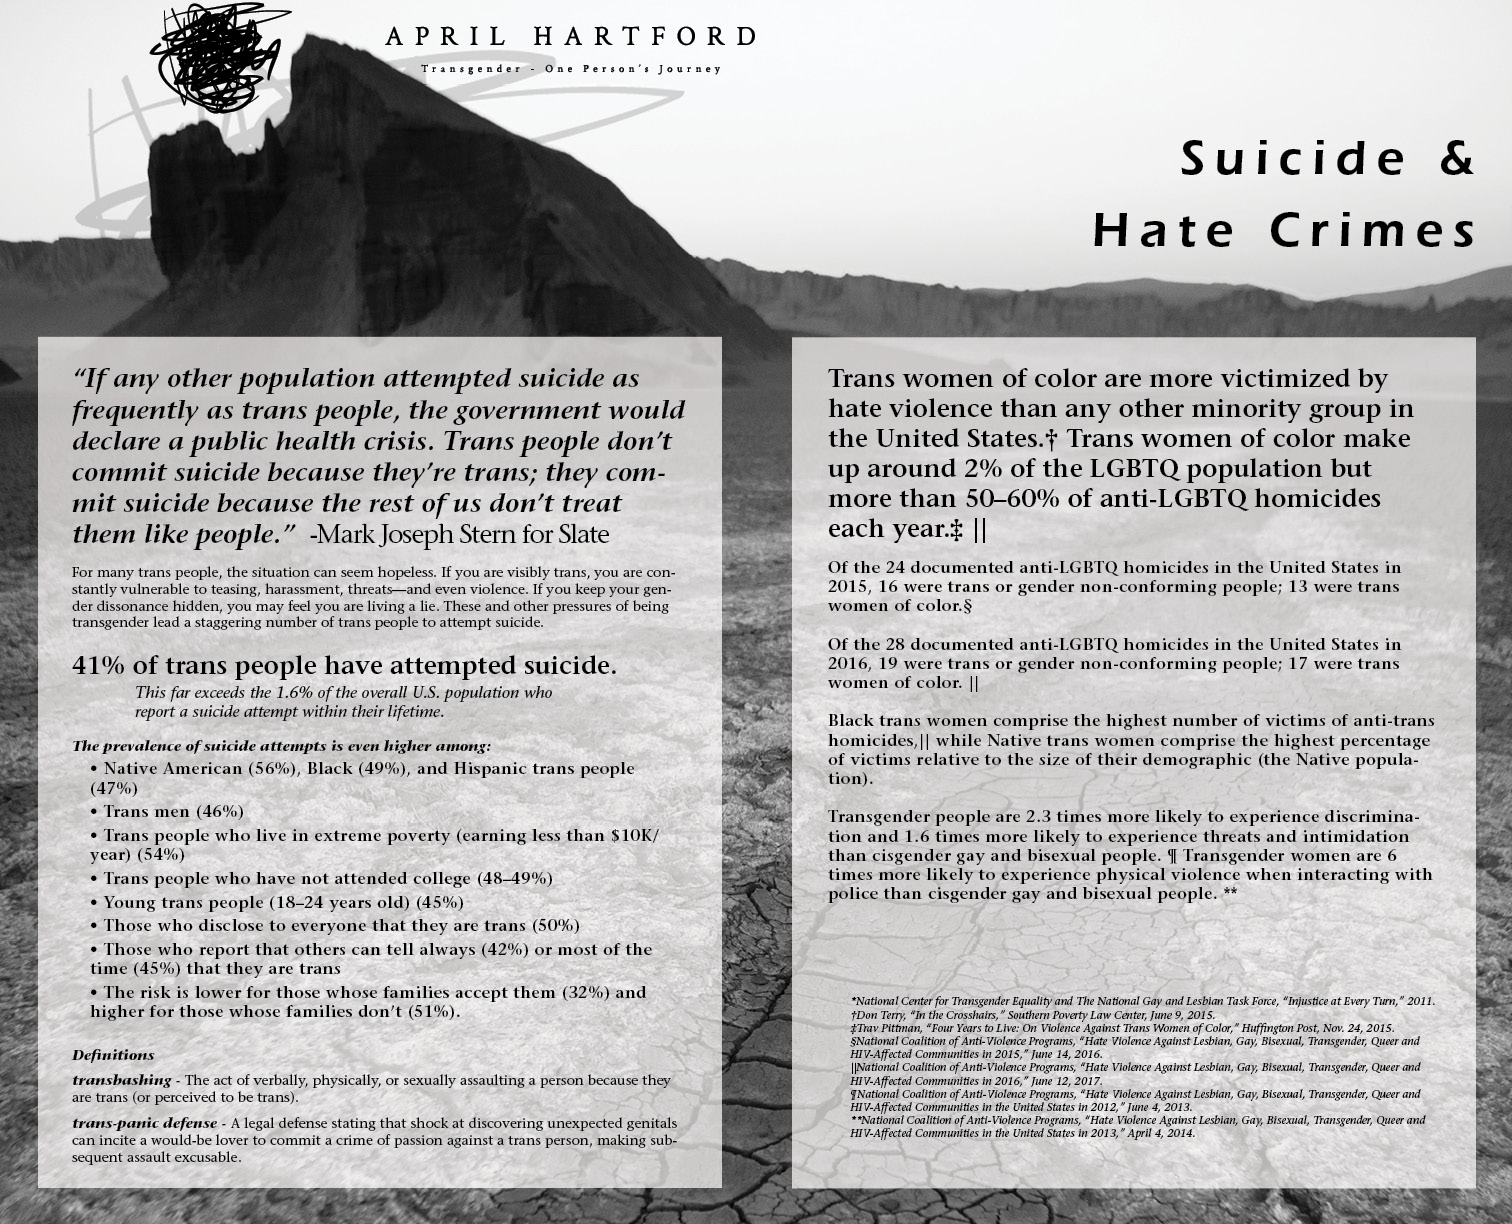 Suicide and Hate Crimes